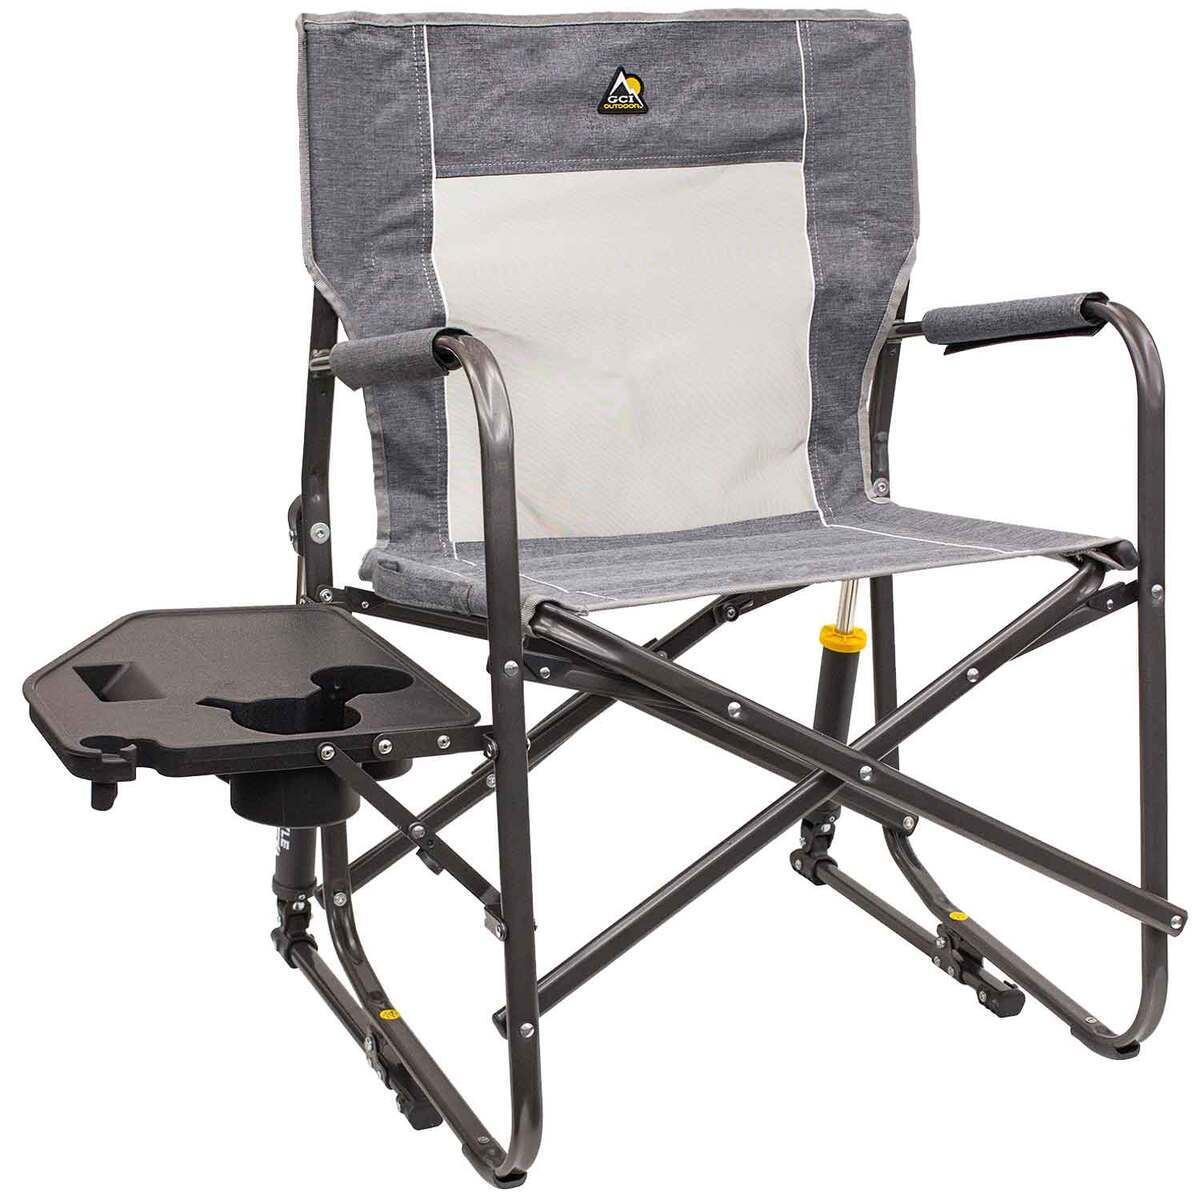 GCI Outdoor Freestyle Rocker with Side Table Camp Chair - Grey | Sportsman's Warehouse